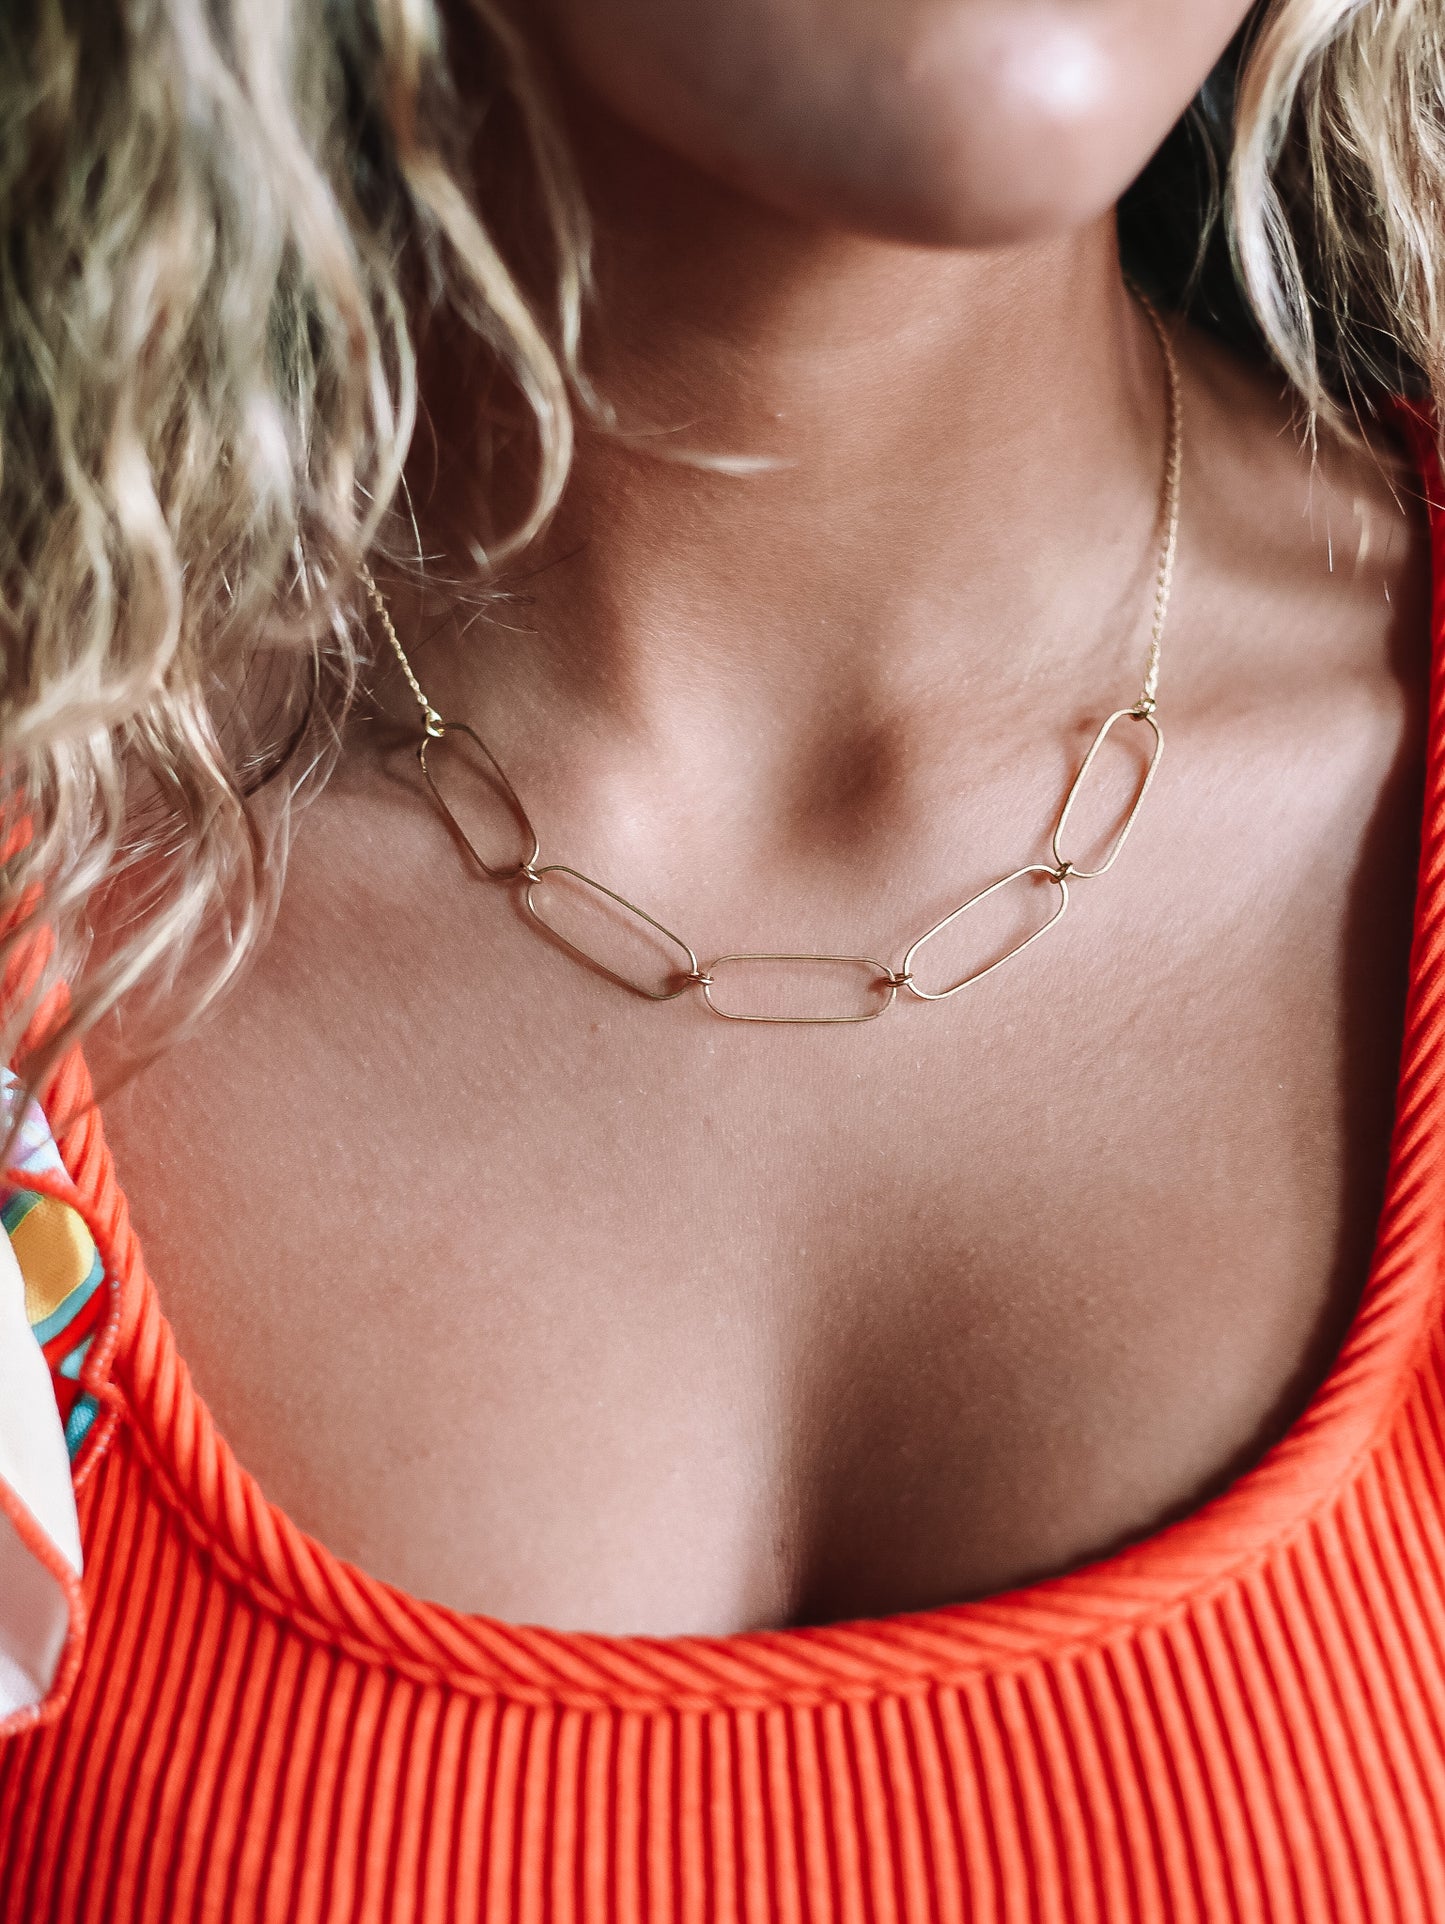 Load image into Gallery viewer, Paperclip Chain Necklace
